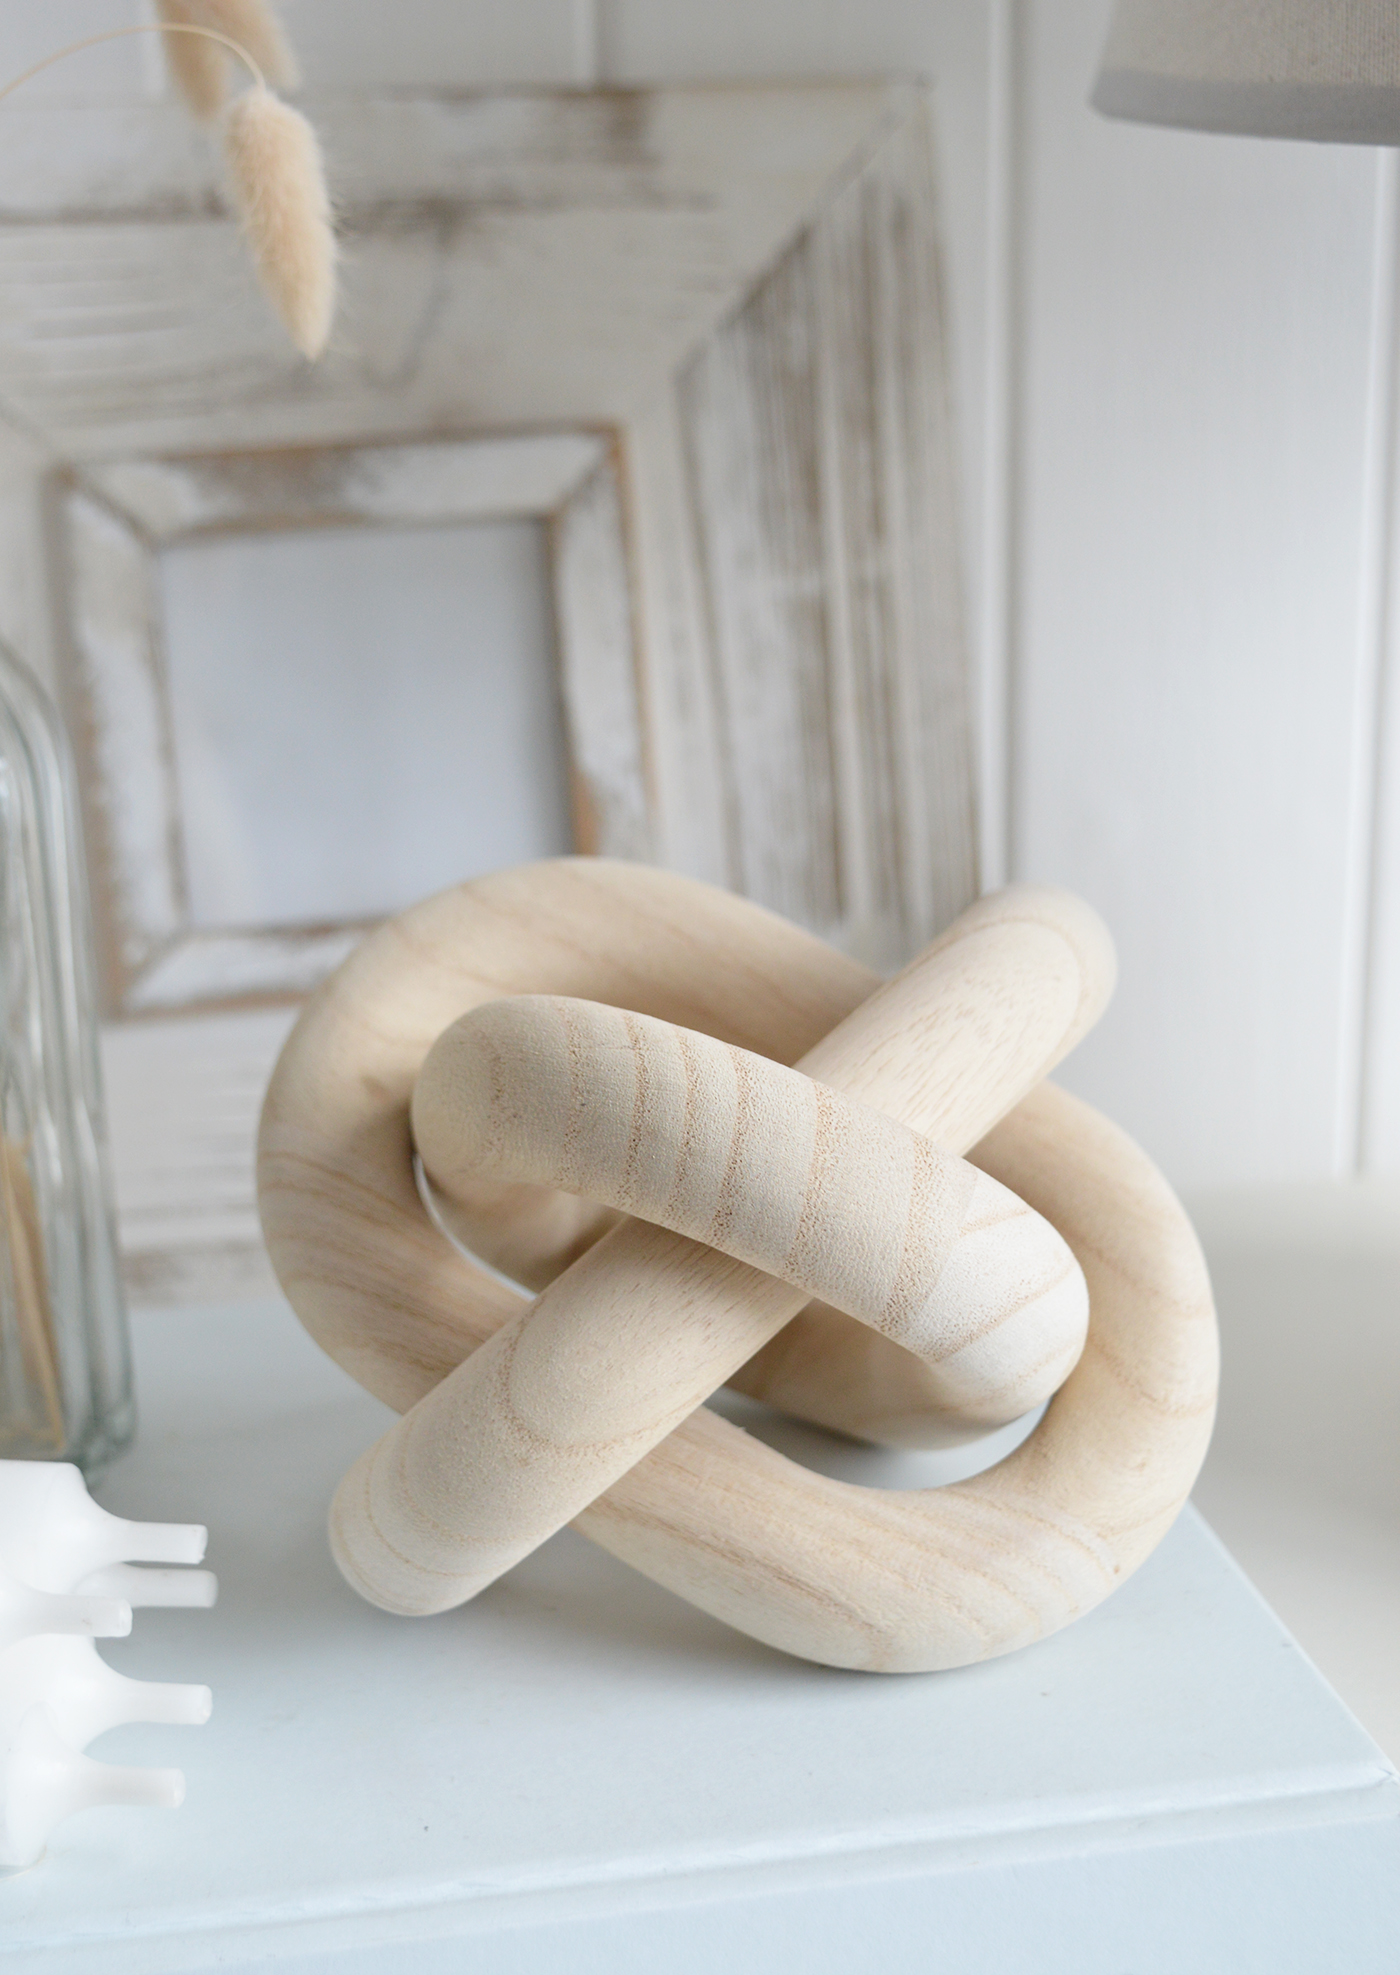 Wooden Knot Sculpture - Shelf, Coffee Table and Console Styling in Modern Farmhouse, Country and Coastal homes and Interiors